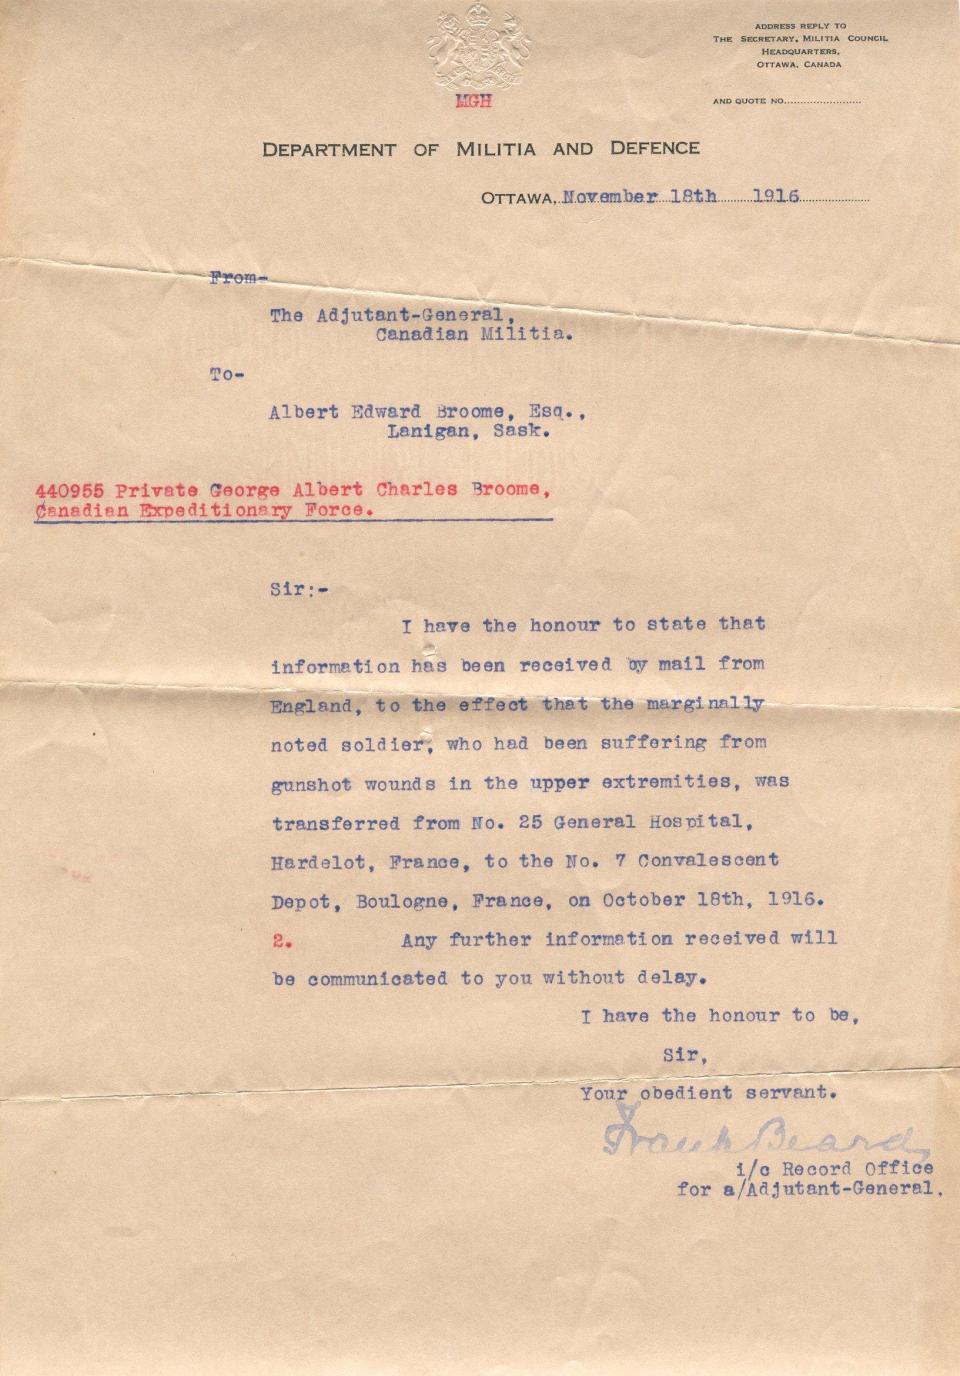 Letter from the 
Department of Militia and Denfence
About transferring Private Broome 
Nov. 18, 1916